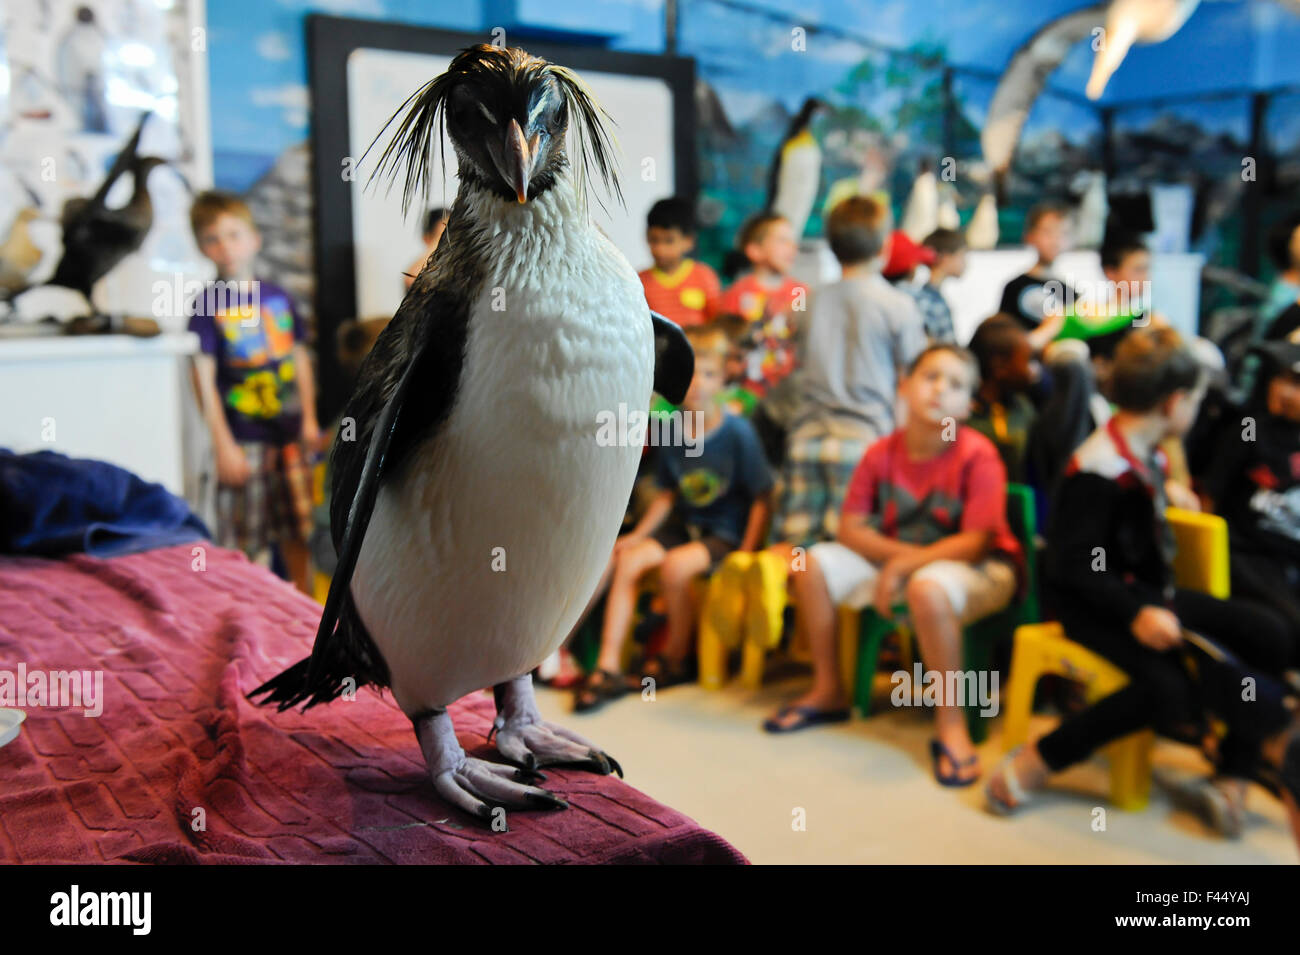 SANCCOB Conservation and seabird education, Cape Town, South Africa. Weston Barwise uses 'Rocky' a Southern rockhopper penguin (Eudyptes chrysocome), to help him teach children about seabirds and marine conservation. November 2011 Stock Photo